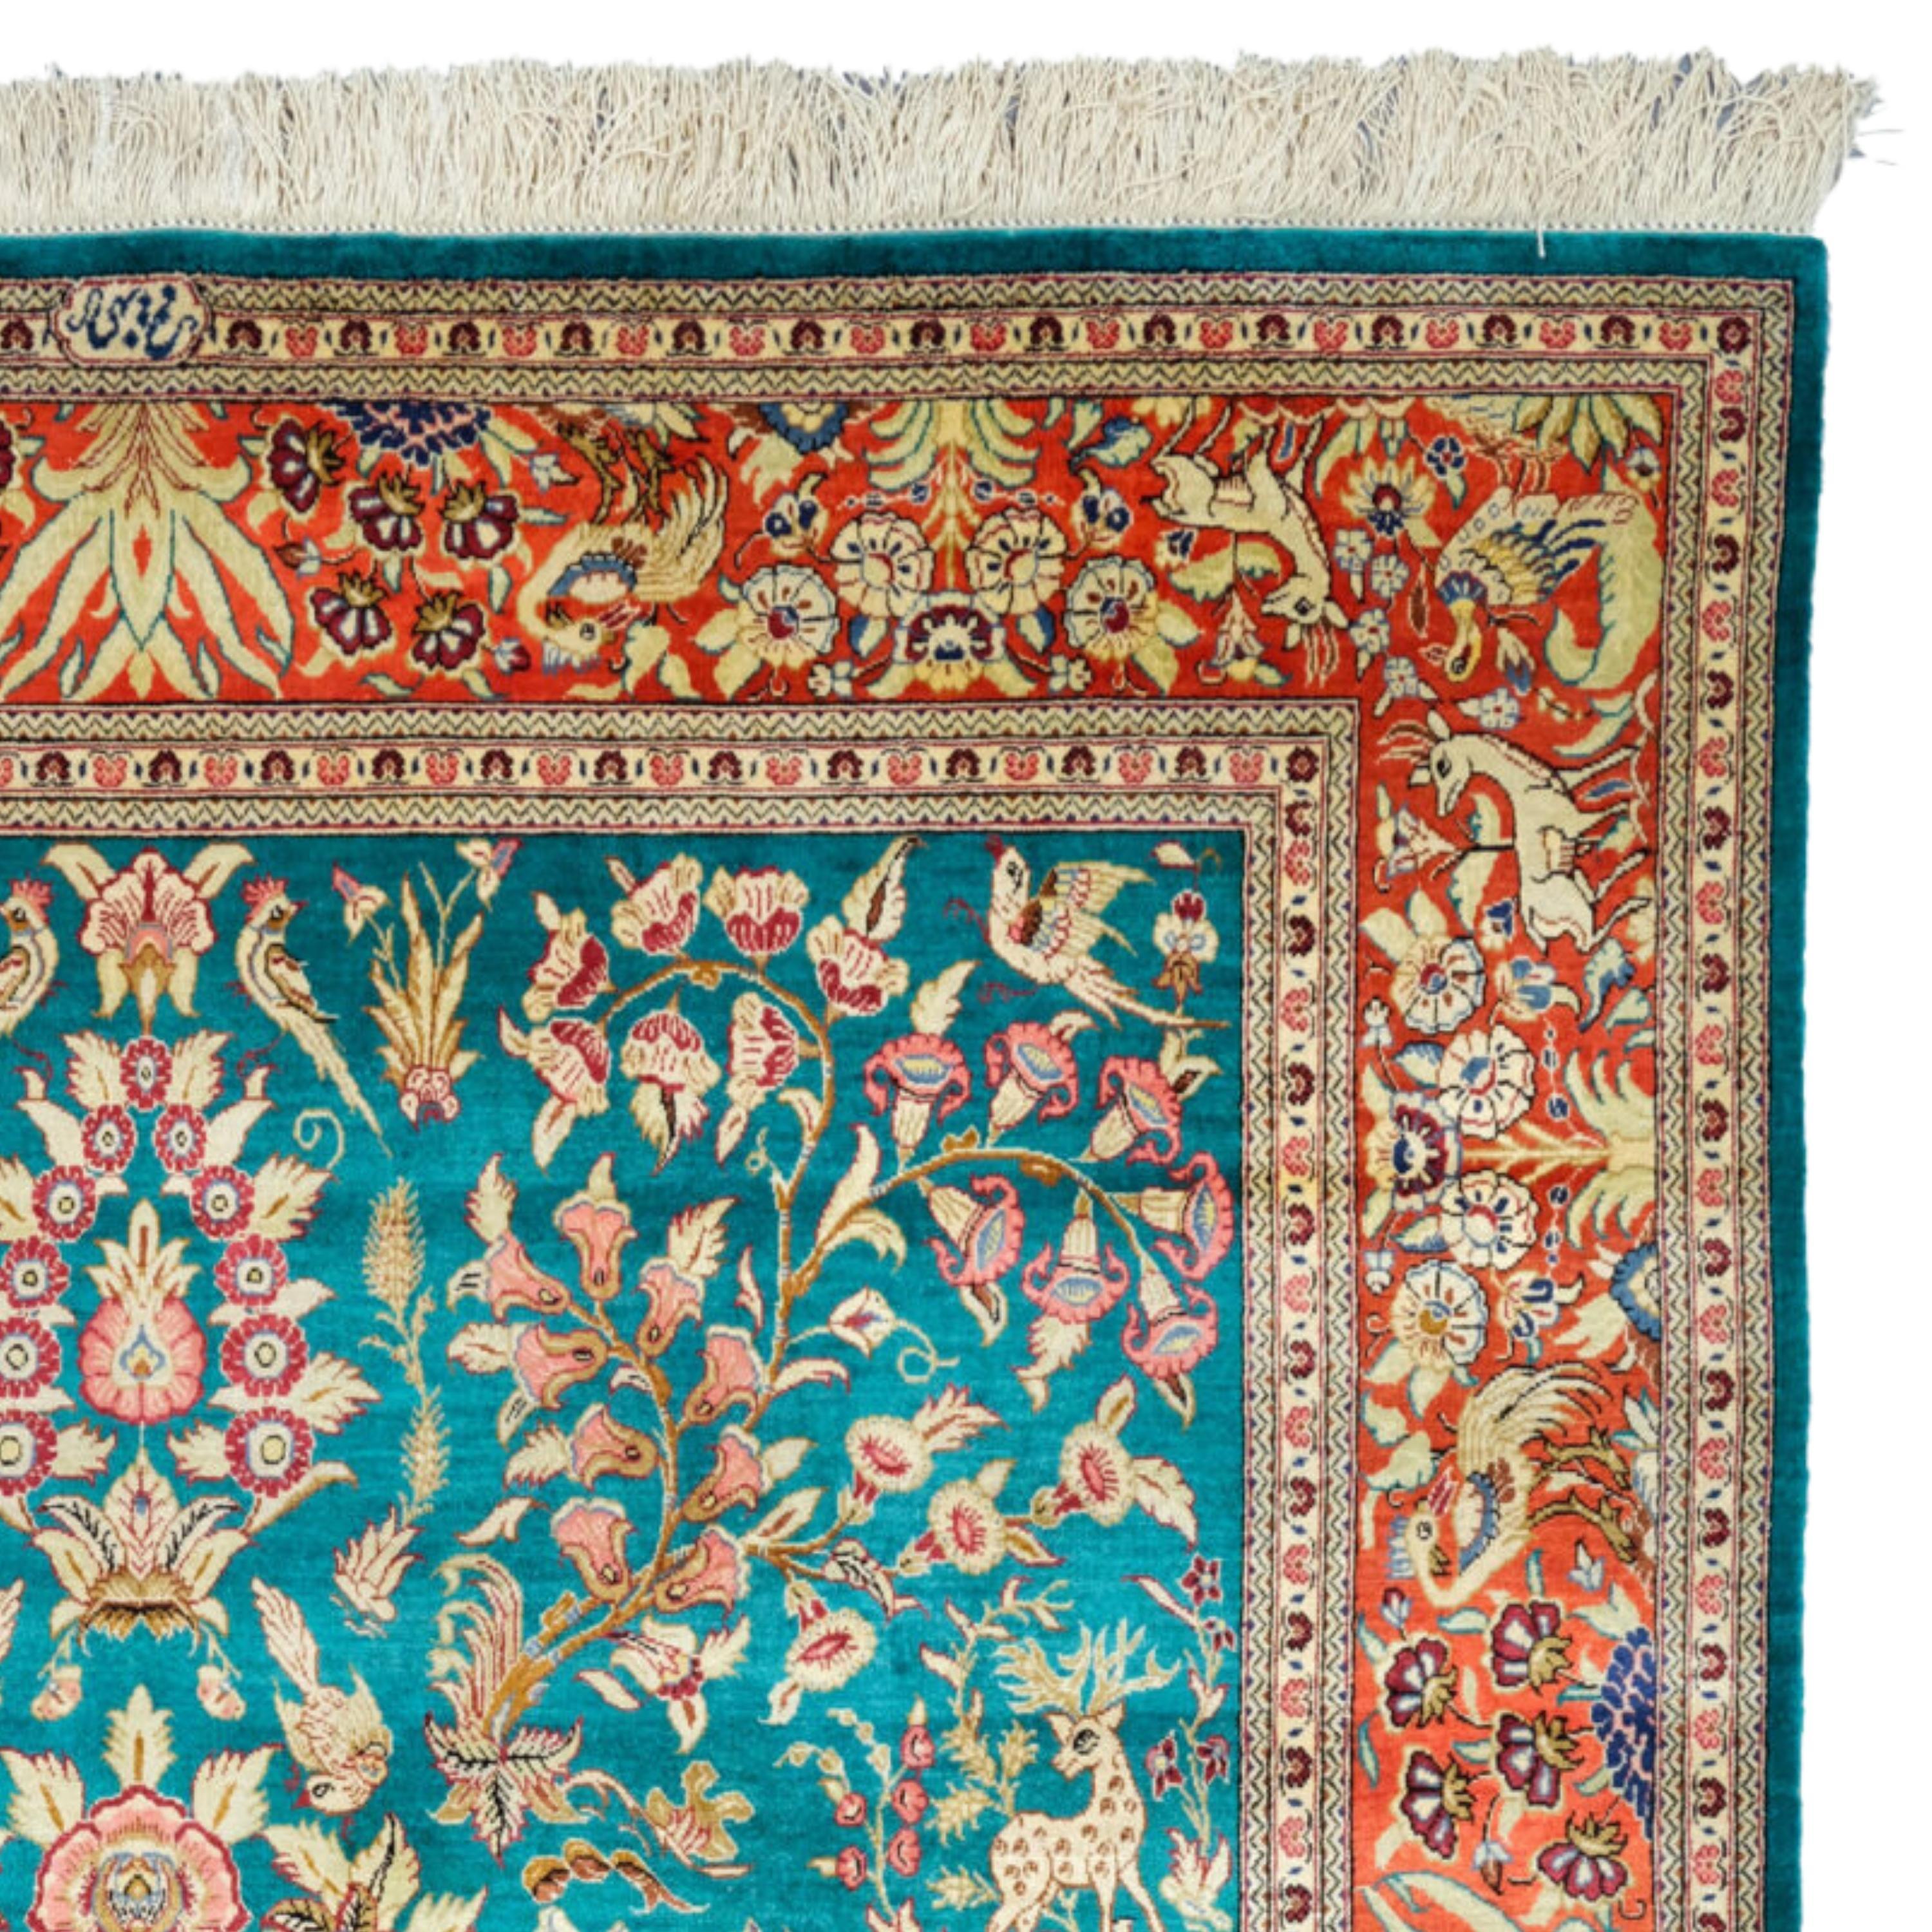 Antique Ghom Rug - Antique Ghom Silk Rug, Antique Silk Rug, Silk Rug In Good Condition For Sale In Sultanahmet, 34